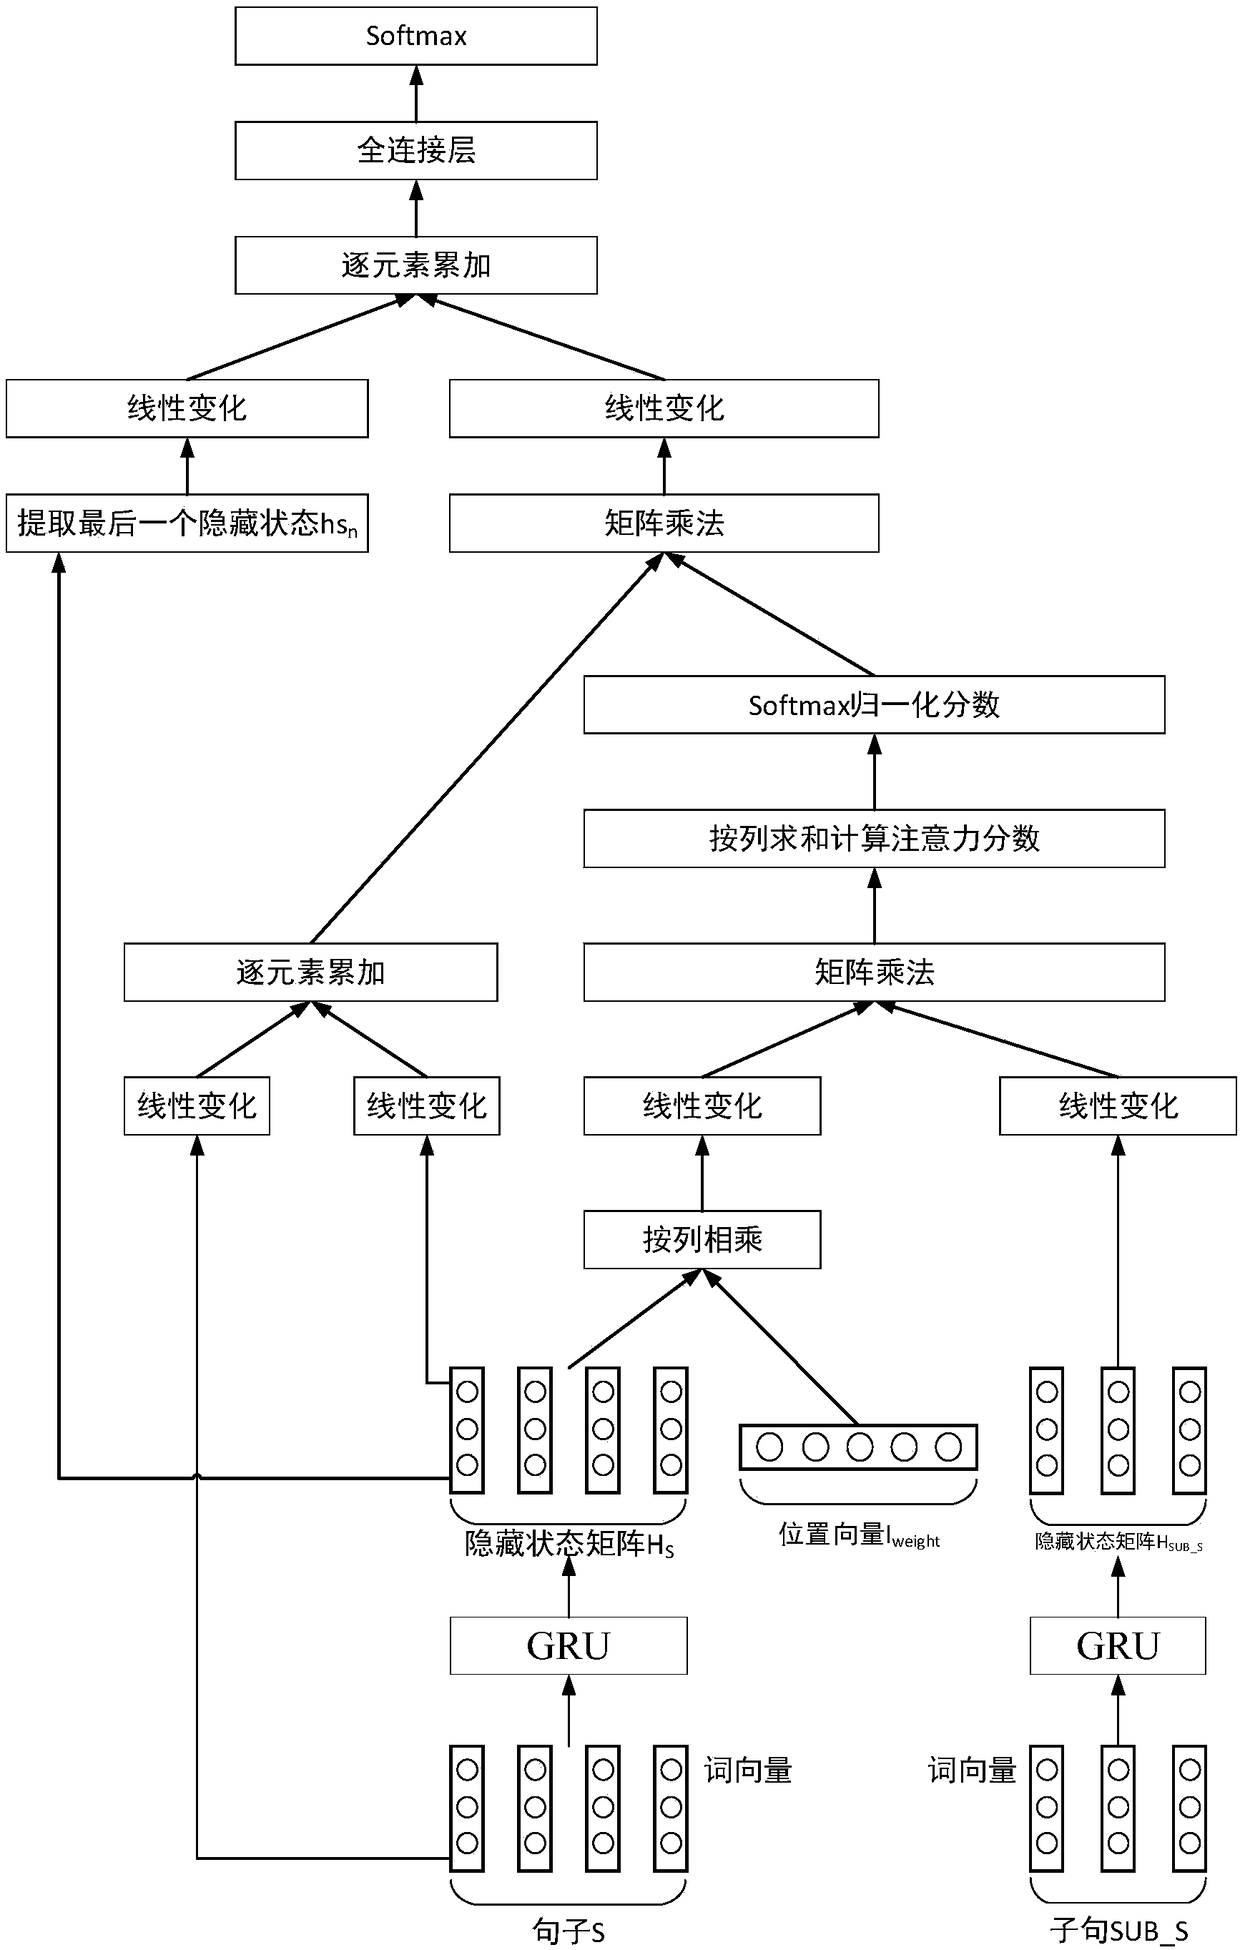 Dependency tree and attention mechanism-based attribute sentiment classification method